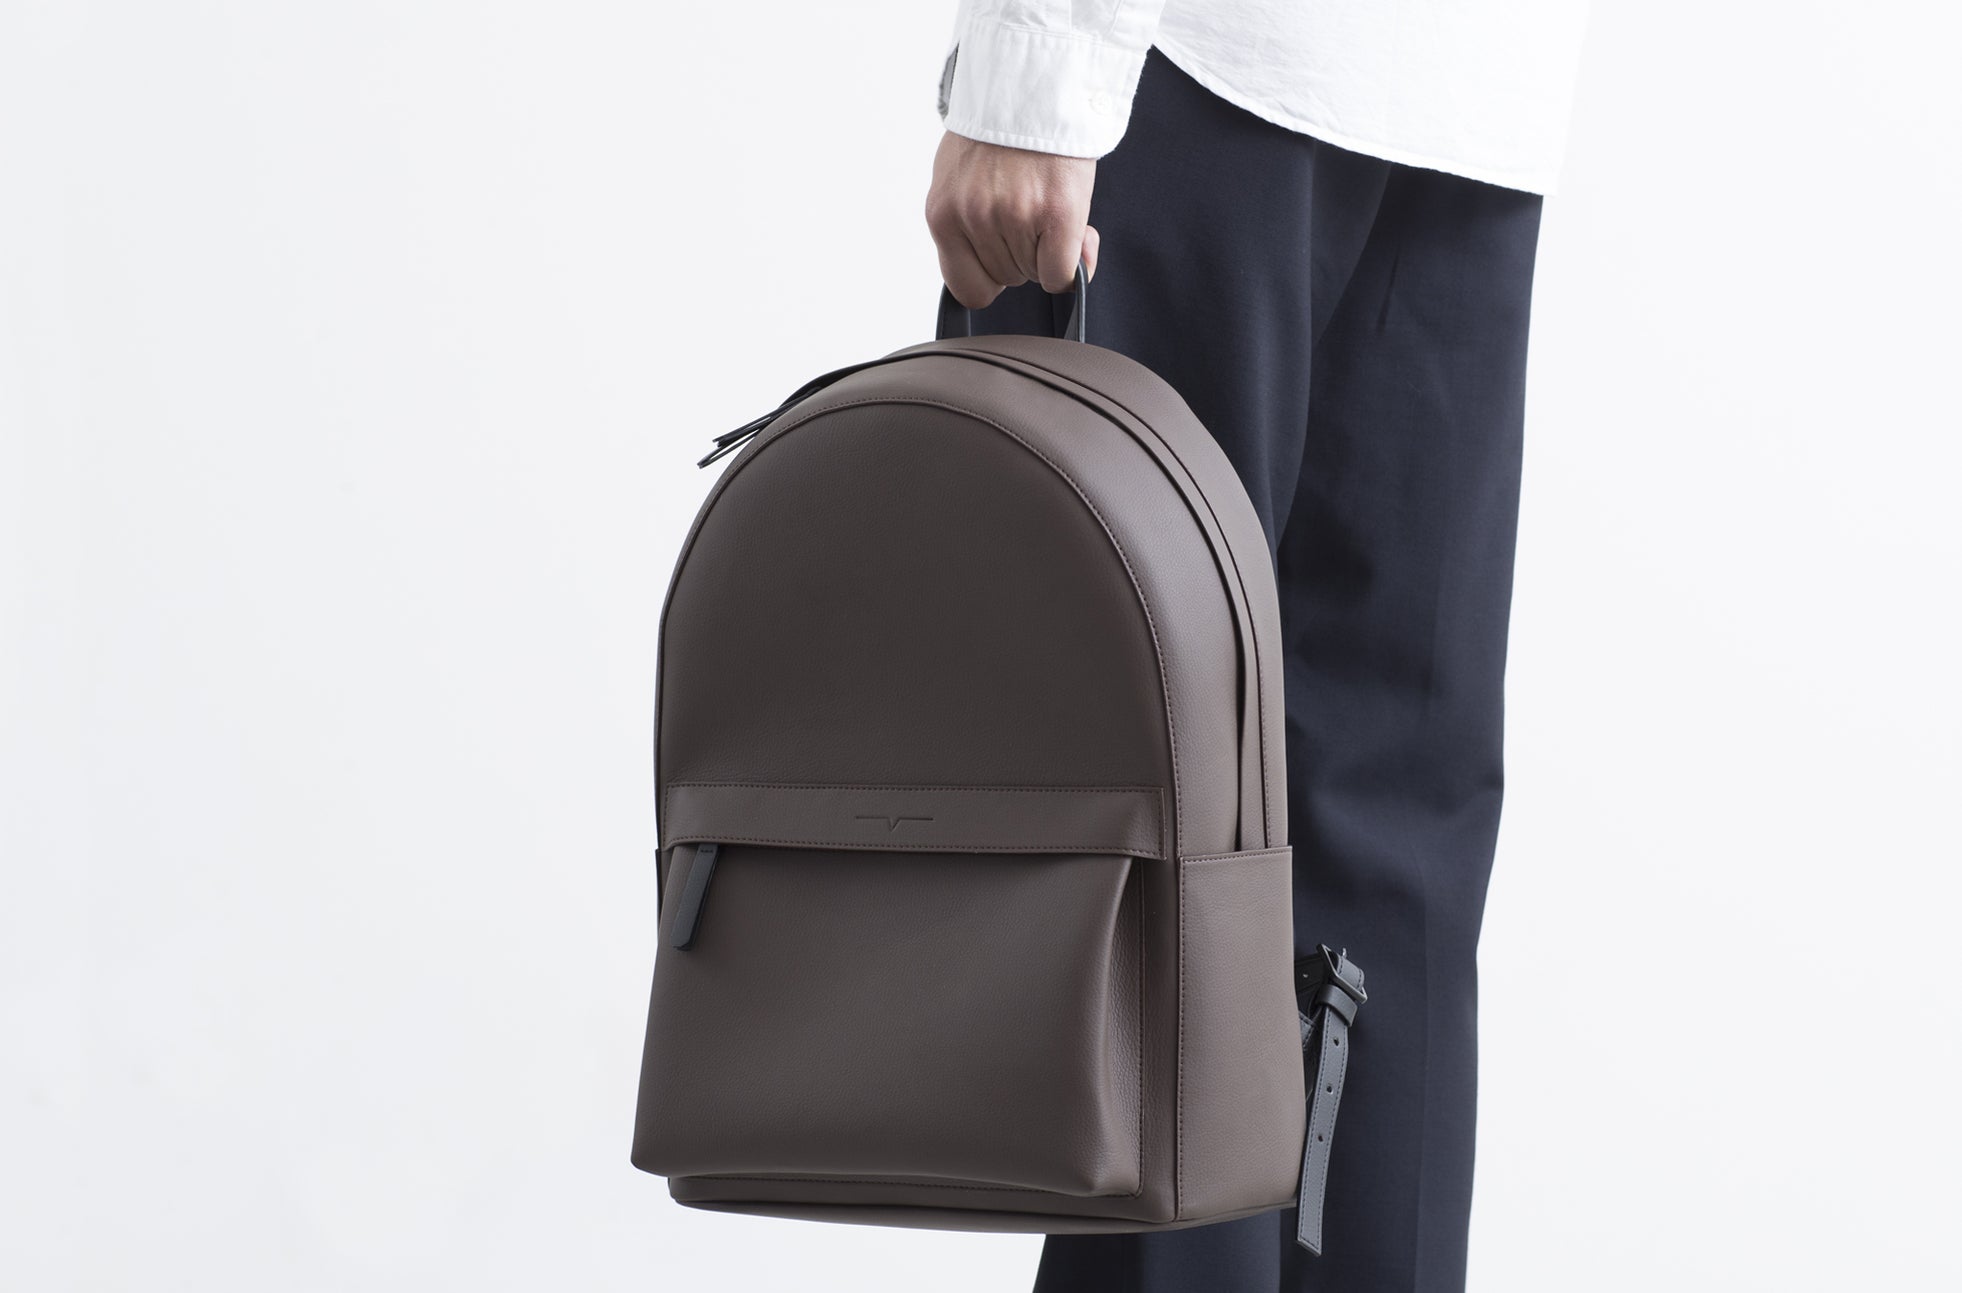 The Classic Backpack in Technik in Taupe and Black image 